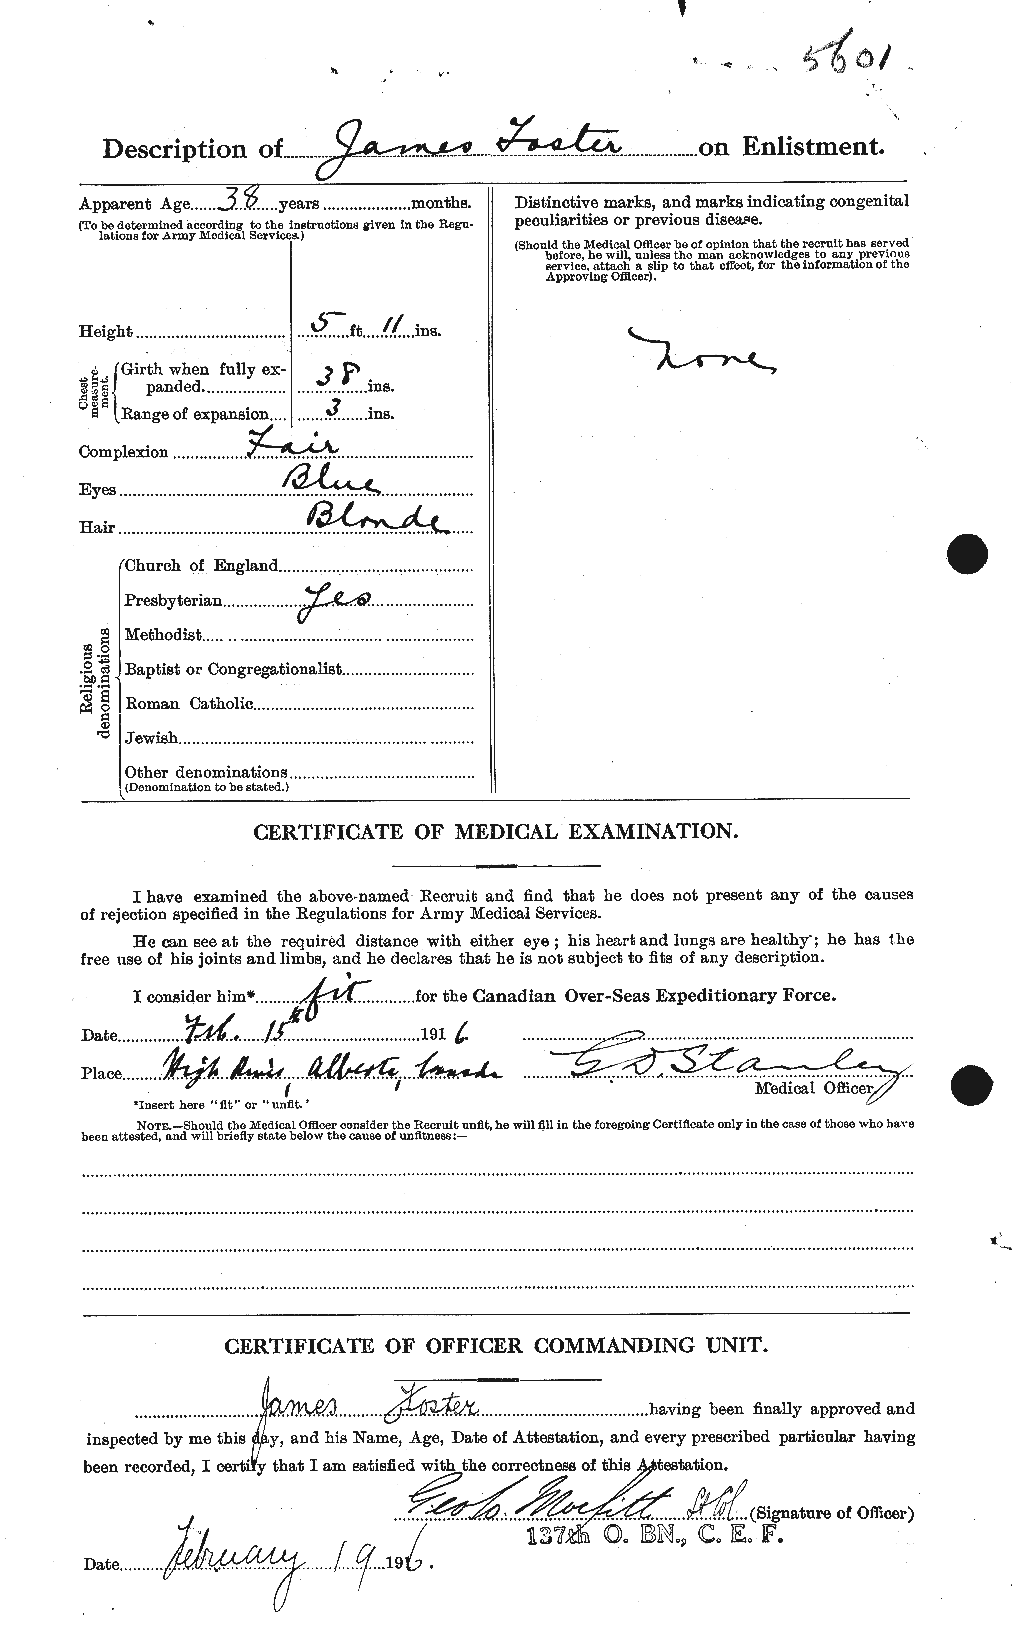 Personnel Records of the First World War - CEF 333275b